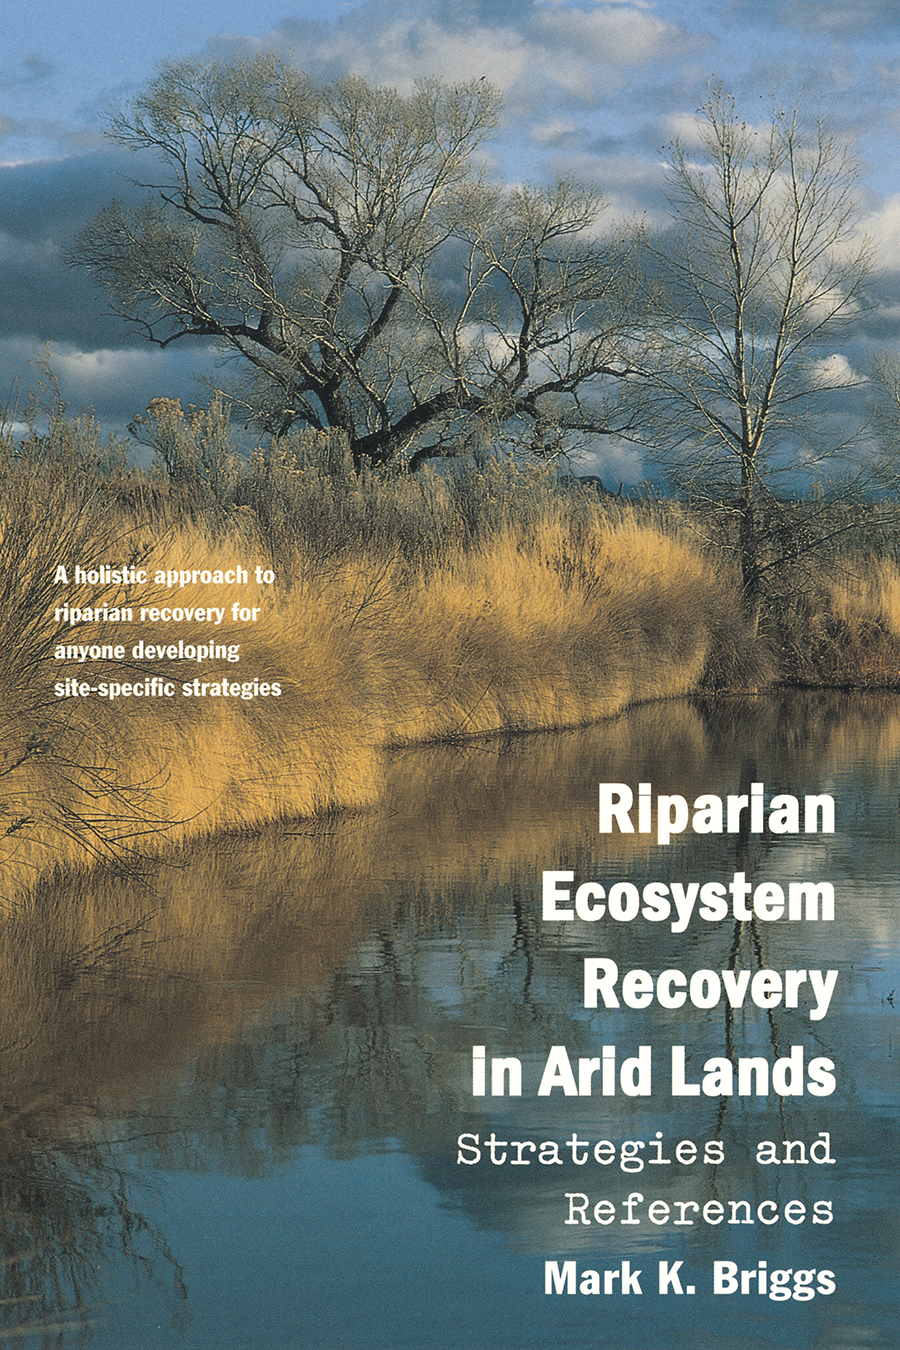 Riparian Ecosystem Recovery in Arid Lands